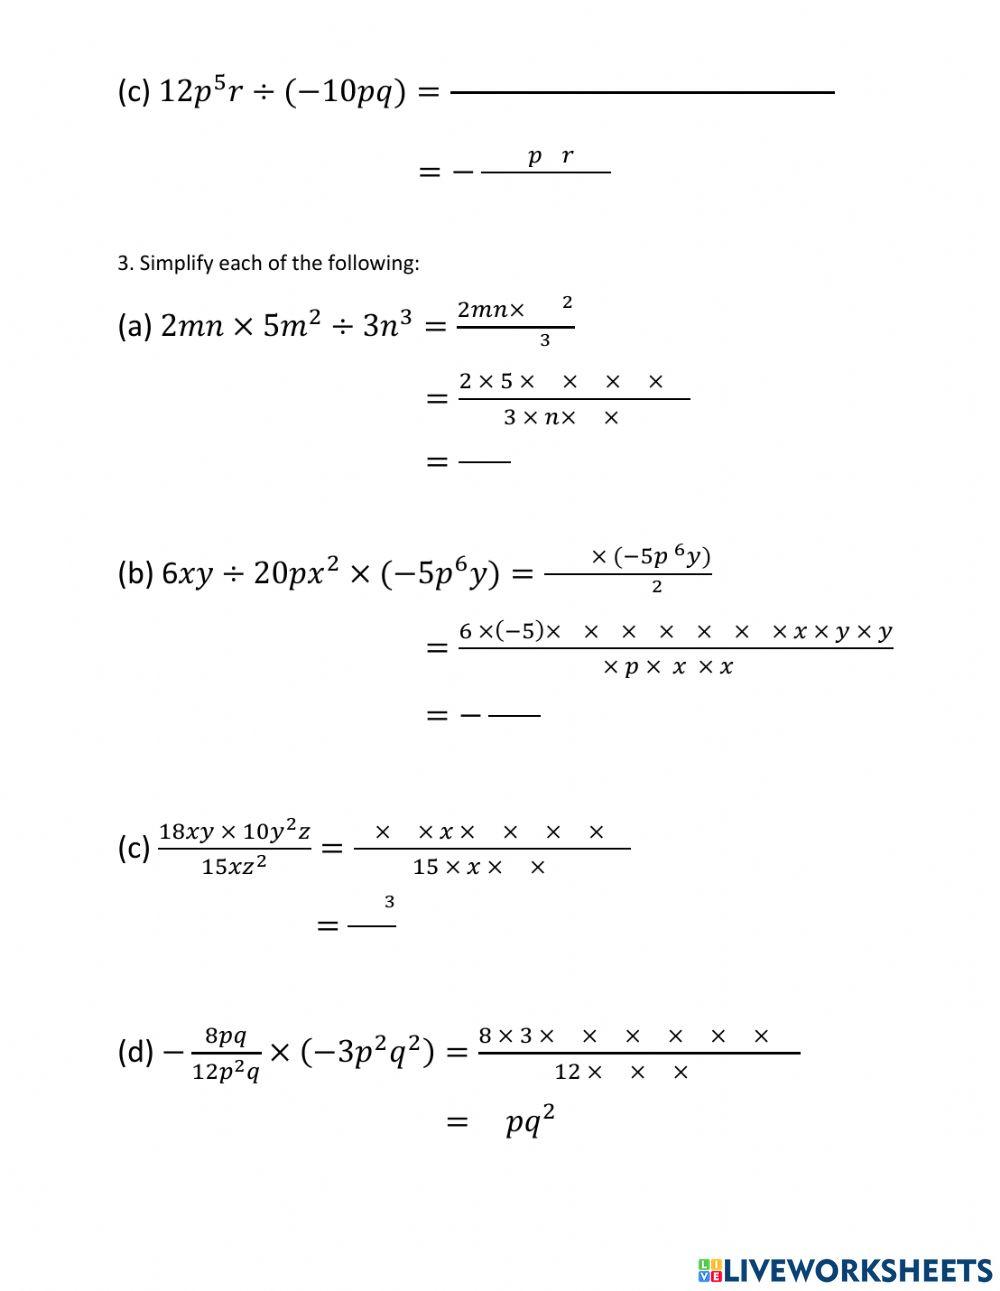 5.2.3 Multiply and Divide Algebraic Expressions with One Term